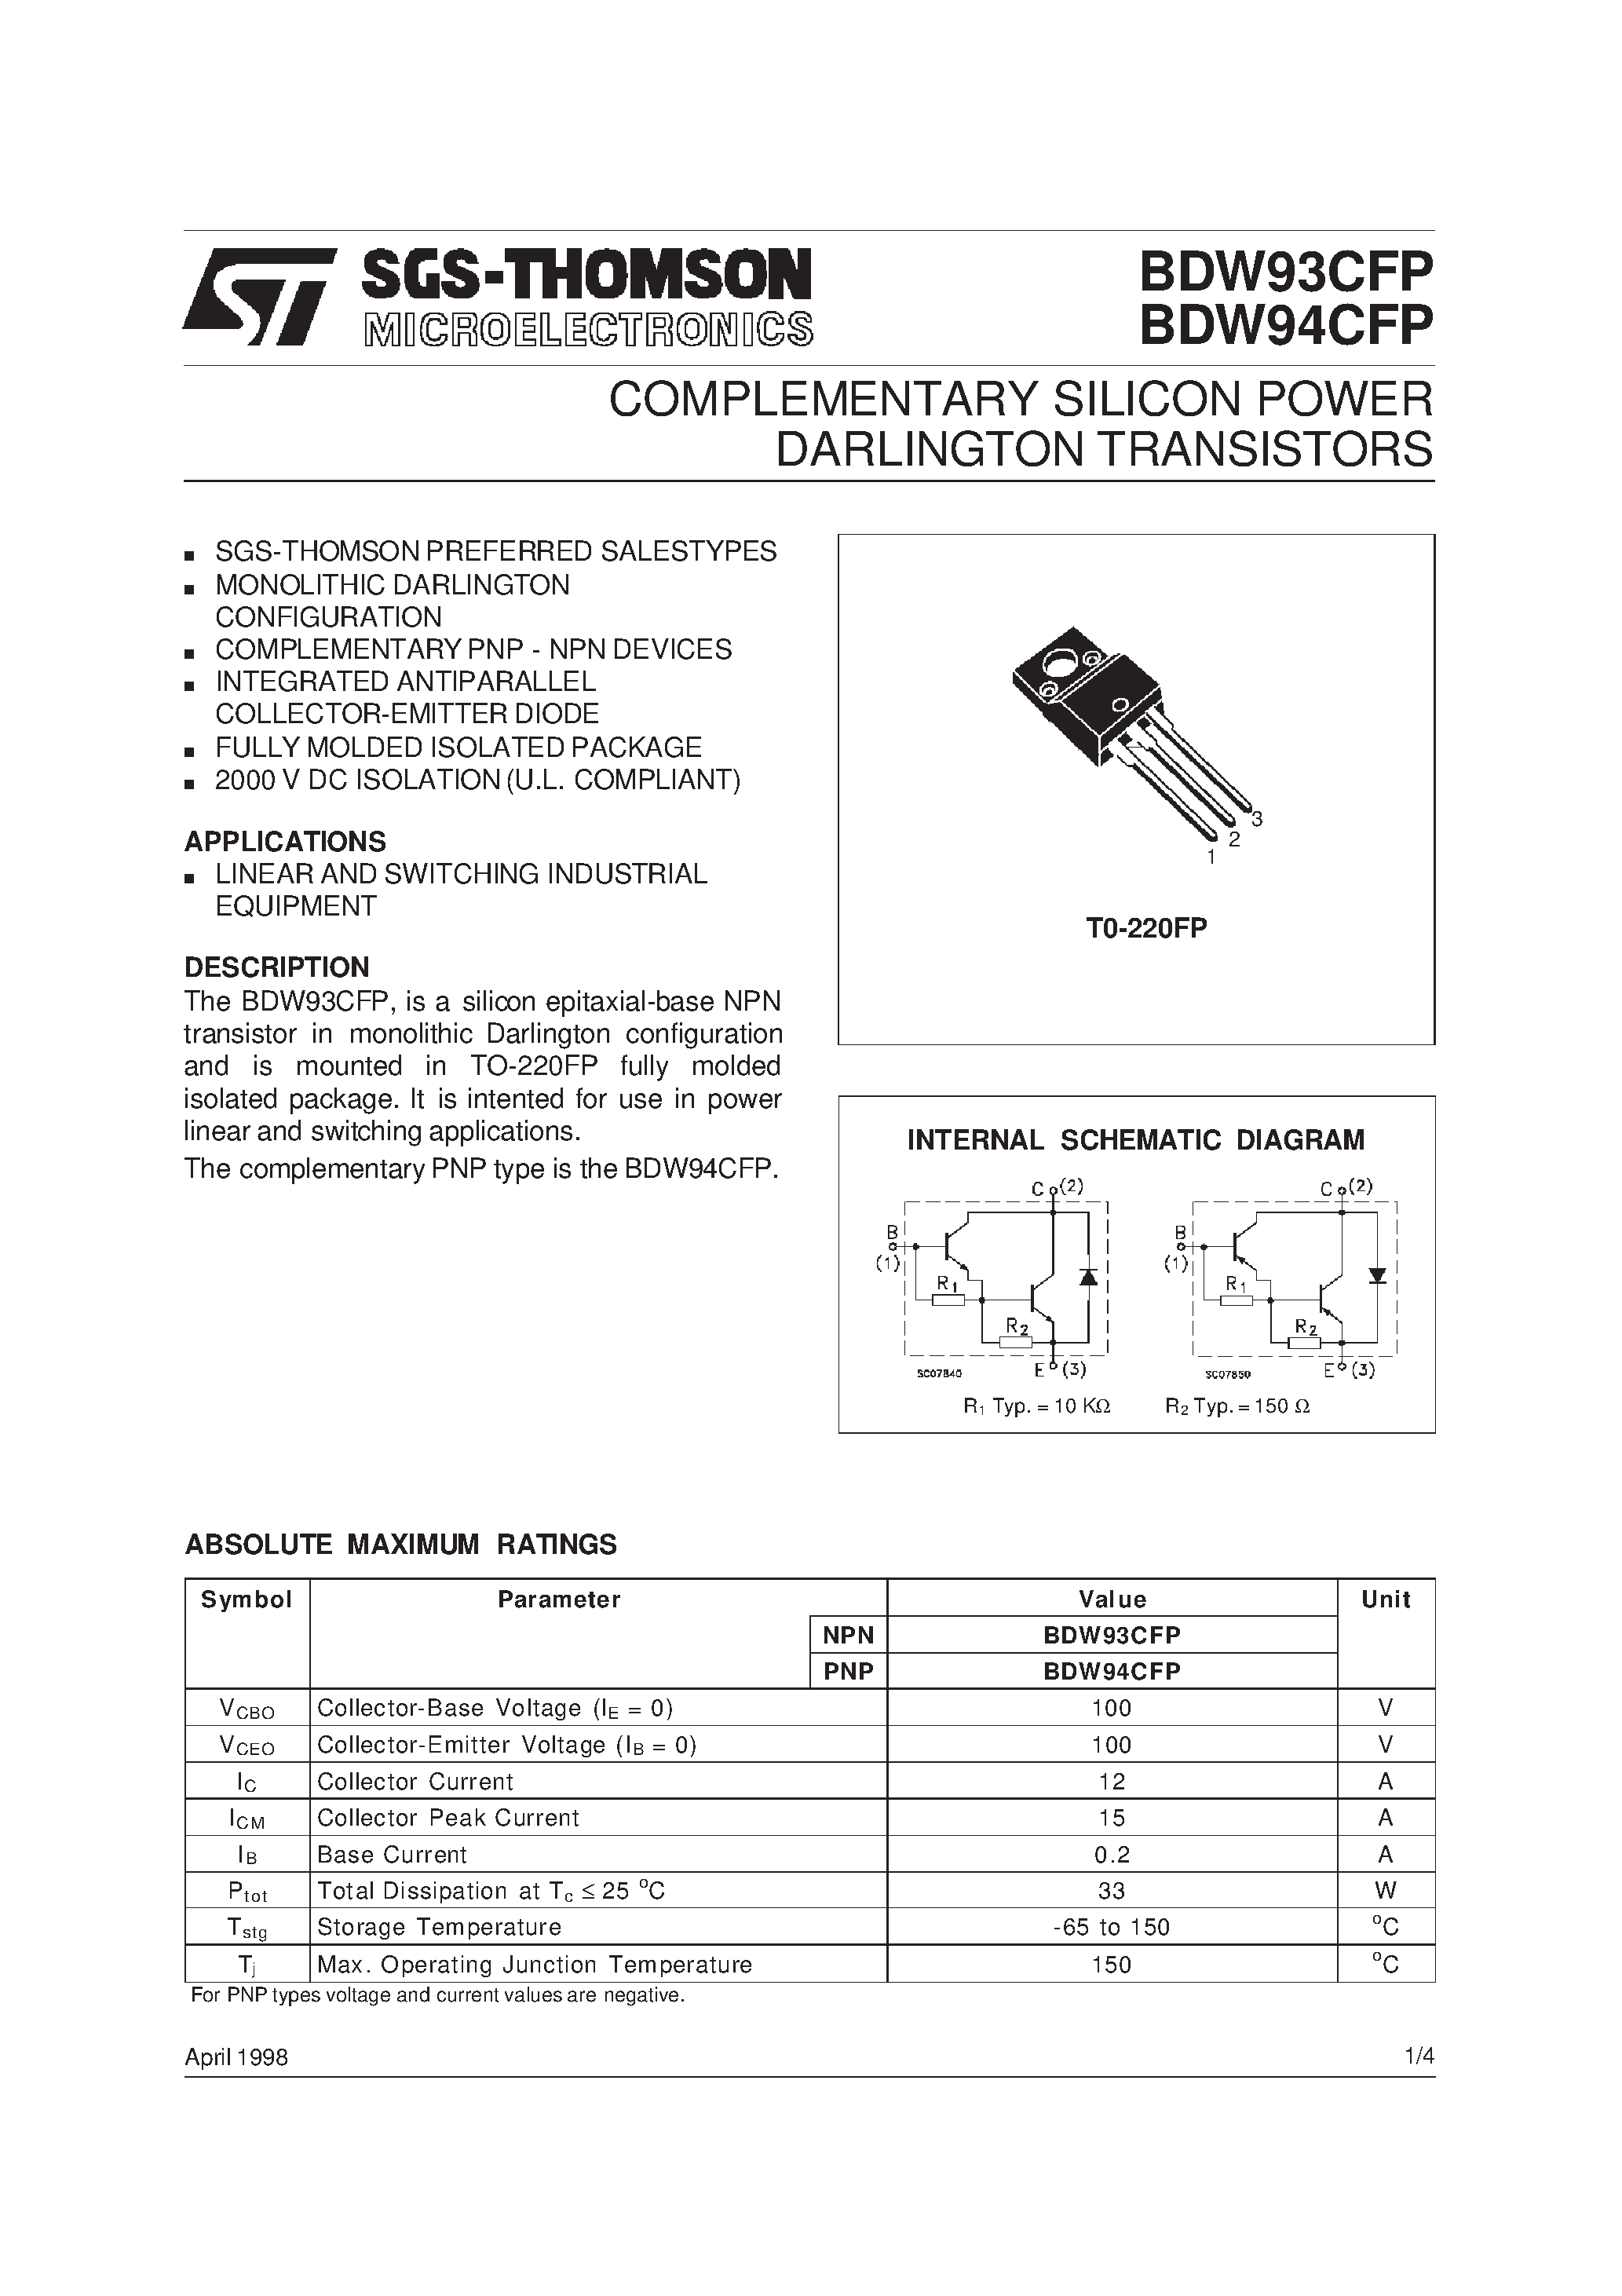 Datasheet BDW94CFP - COMPLEMENTARY SILICON POWER DARLINGTON TRANSISTORS page 1